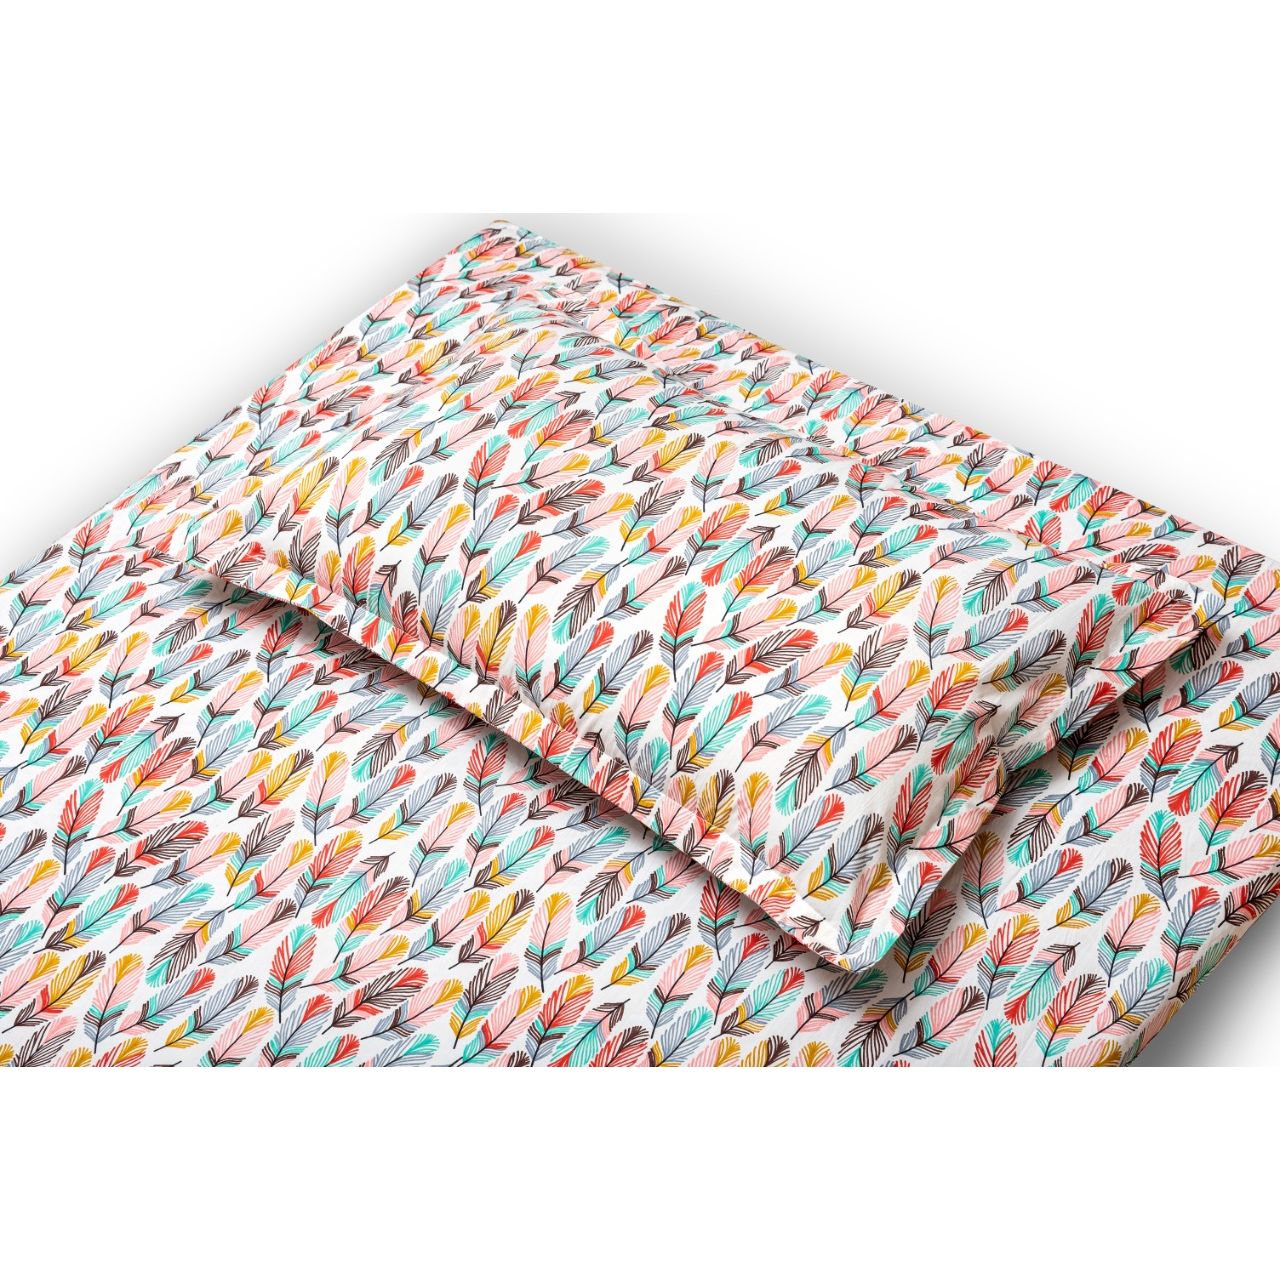 100% Organic Cotton 220-Thread Counts Flat Single Bedsheets - Dreamy Feathers